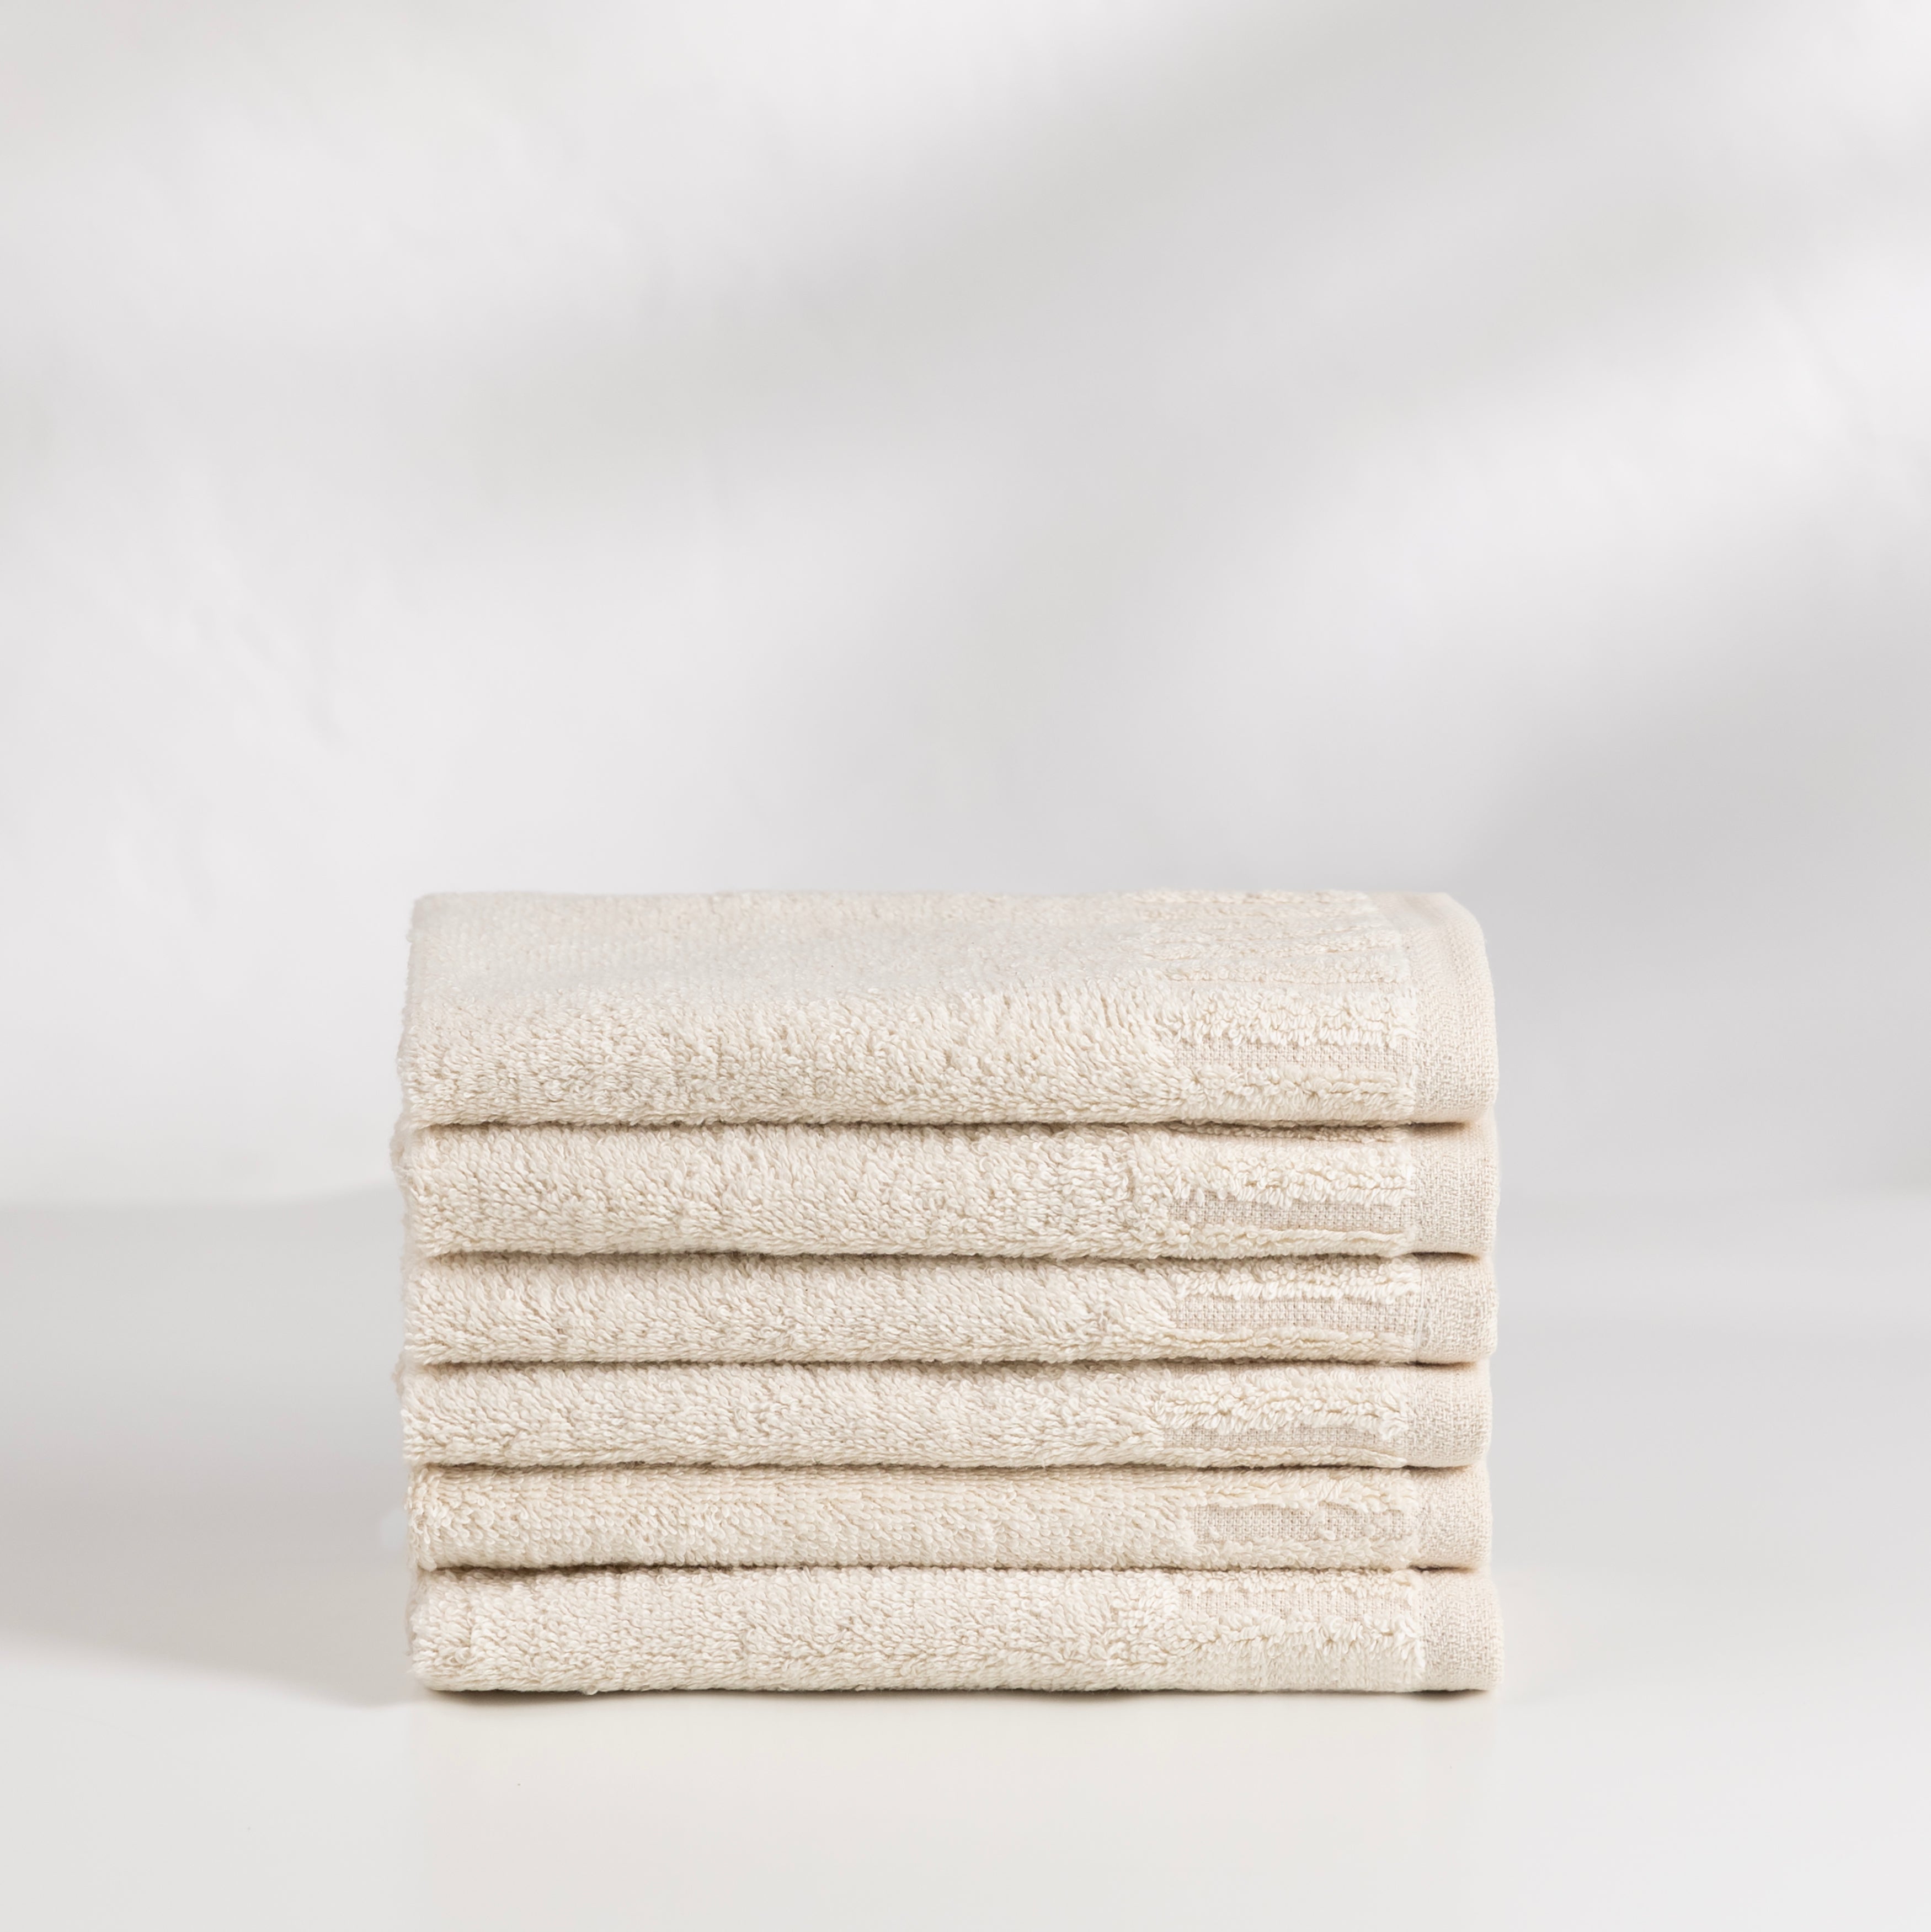 hotels - What is the use of all these towels? - Travel Stack Exchange